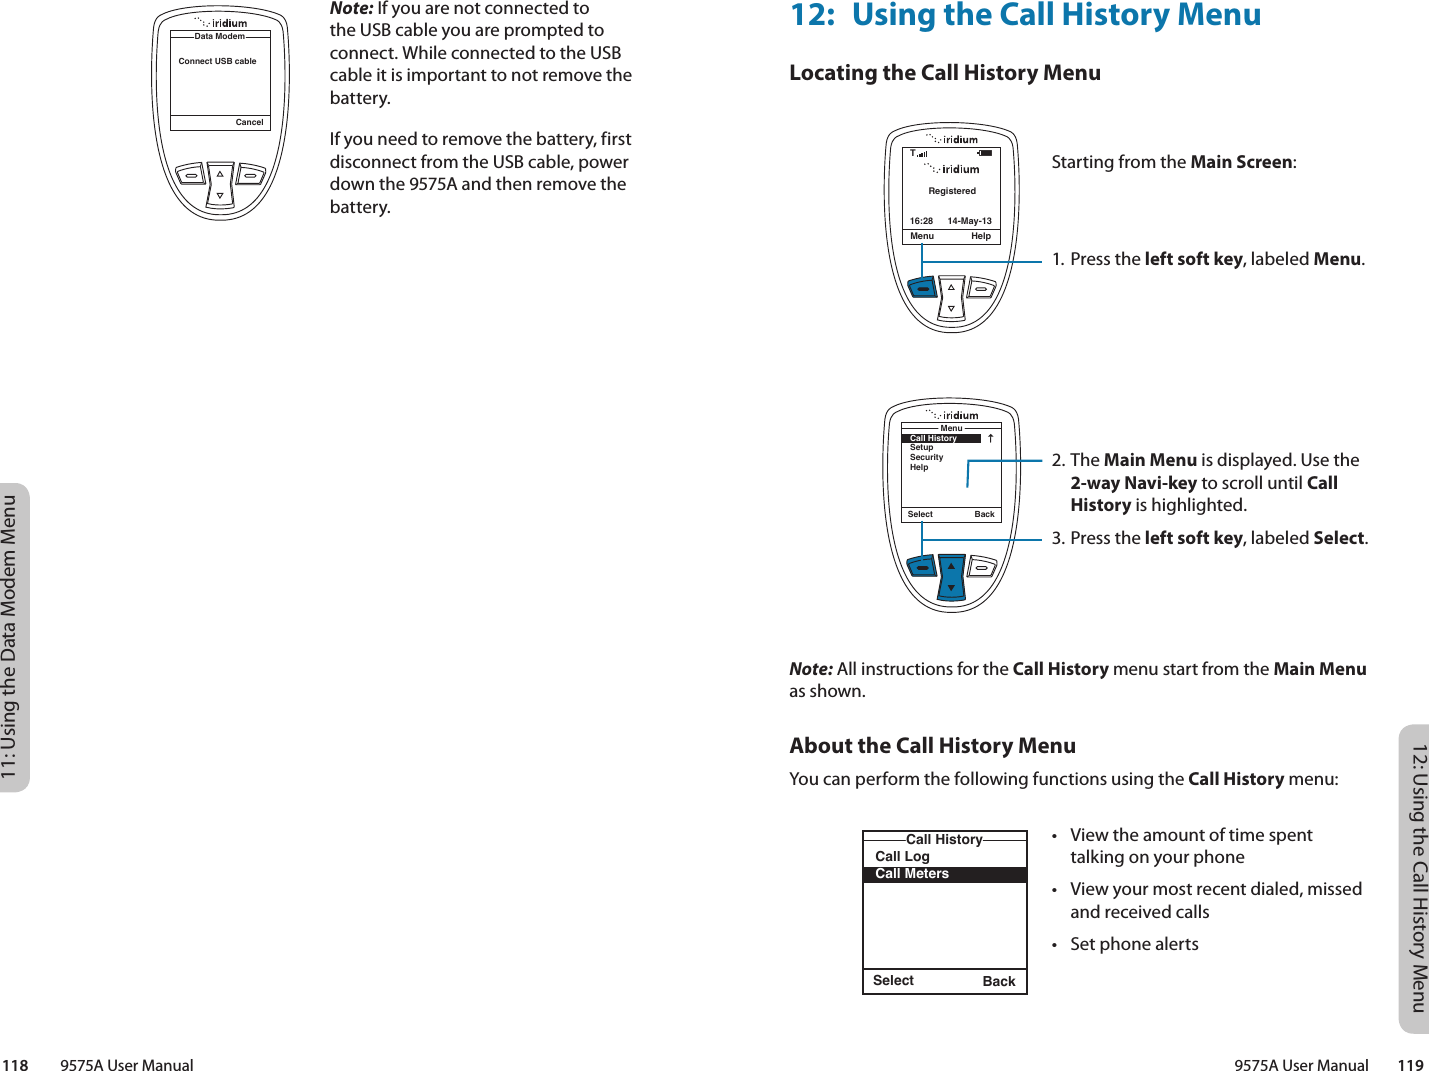 12: Using the Call History Menu9575A User Manual        11911: Using the Data Modem Menu118         9575A User ManualNote: If you are not connected to the USB cable you are prompted to connect. While connected to the USB cable it is important to not remove the battery.If you need to remove the battery, first disconnect from the USB cable, power down the 9575A and then remove the battery.CancelData ModemConnect USB cable12:  Using the Call History MenuLocating the Call History MenuNote: All instructions for the Call History menu start from the Main Menu as shown.About the Call History MenuYou can perform the following functions using the Call History menu:Select BackCall LogCall MetersCall HistoryRegisteredMenu Help16:28 14-May-13TSelect BackMenuCall HistorySetupSecurityHelpStarting from the Main Screen:1. Press the left soft key, labeled Menu.2. The Main Menu is displayed. Use the 2-way Navi-key to scroll until Call History is highlighted.3.  Press the left soft key, labeled Select.•  View the amount of time spent talking on your phone•  View your most recent dialed, missed and received calls•  Set phone alerts